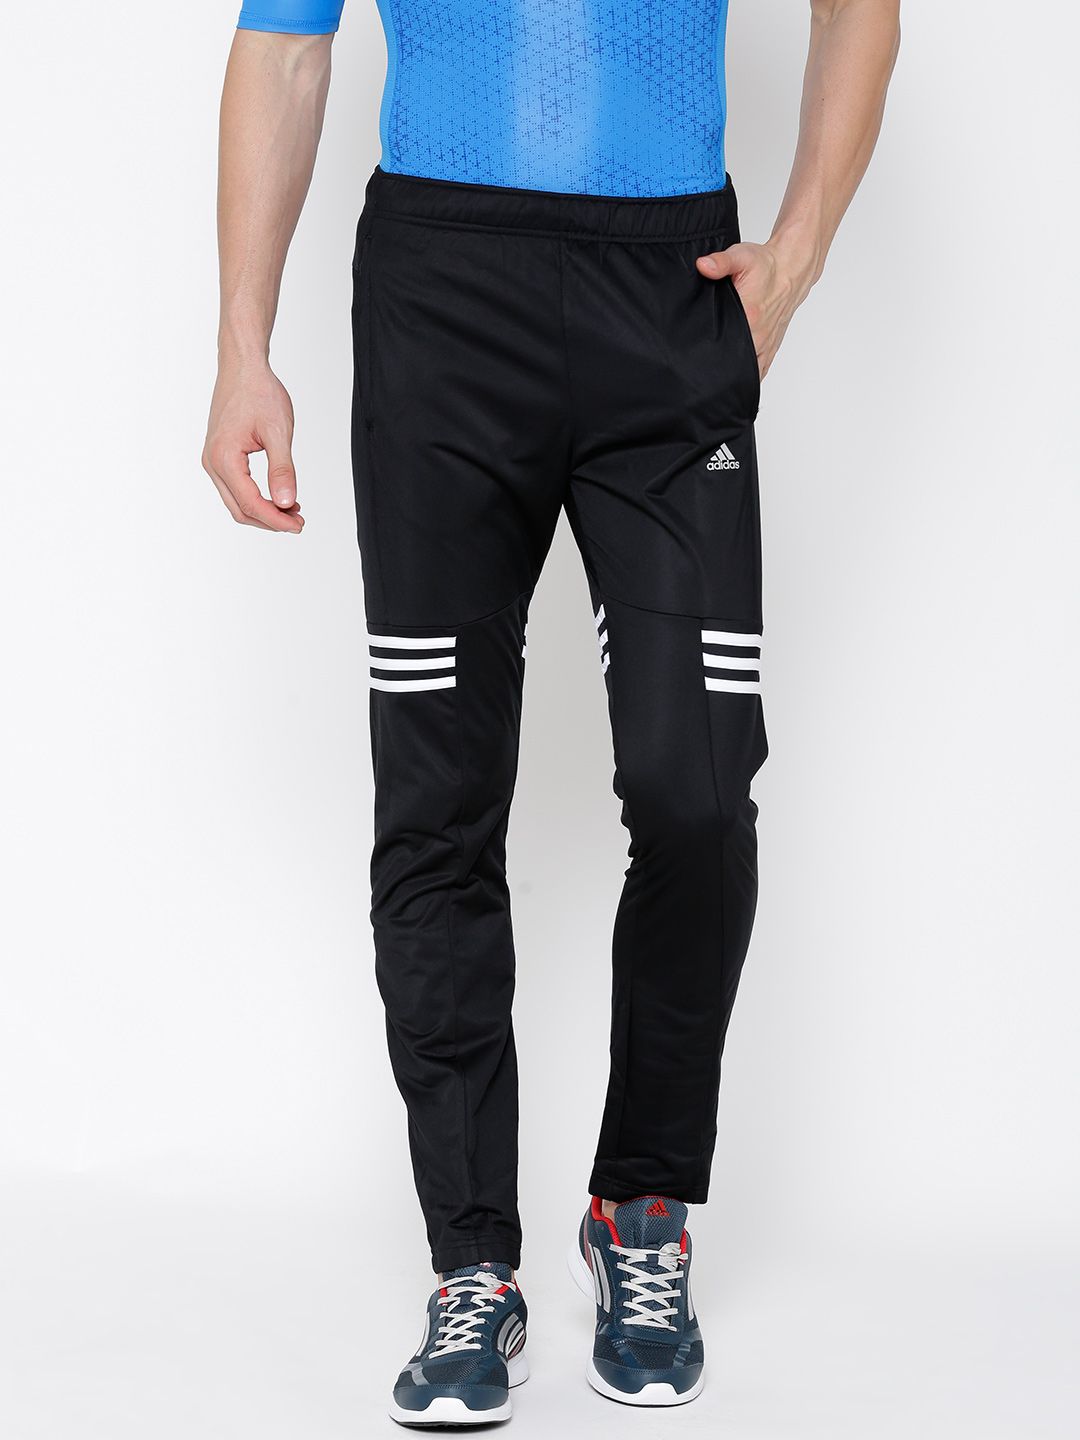 Buy adidas tracksuit pants men >Free shipping for worldwide!OFF34% The ...